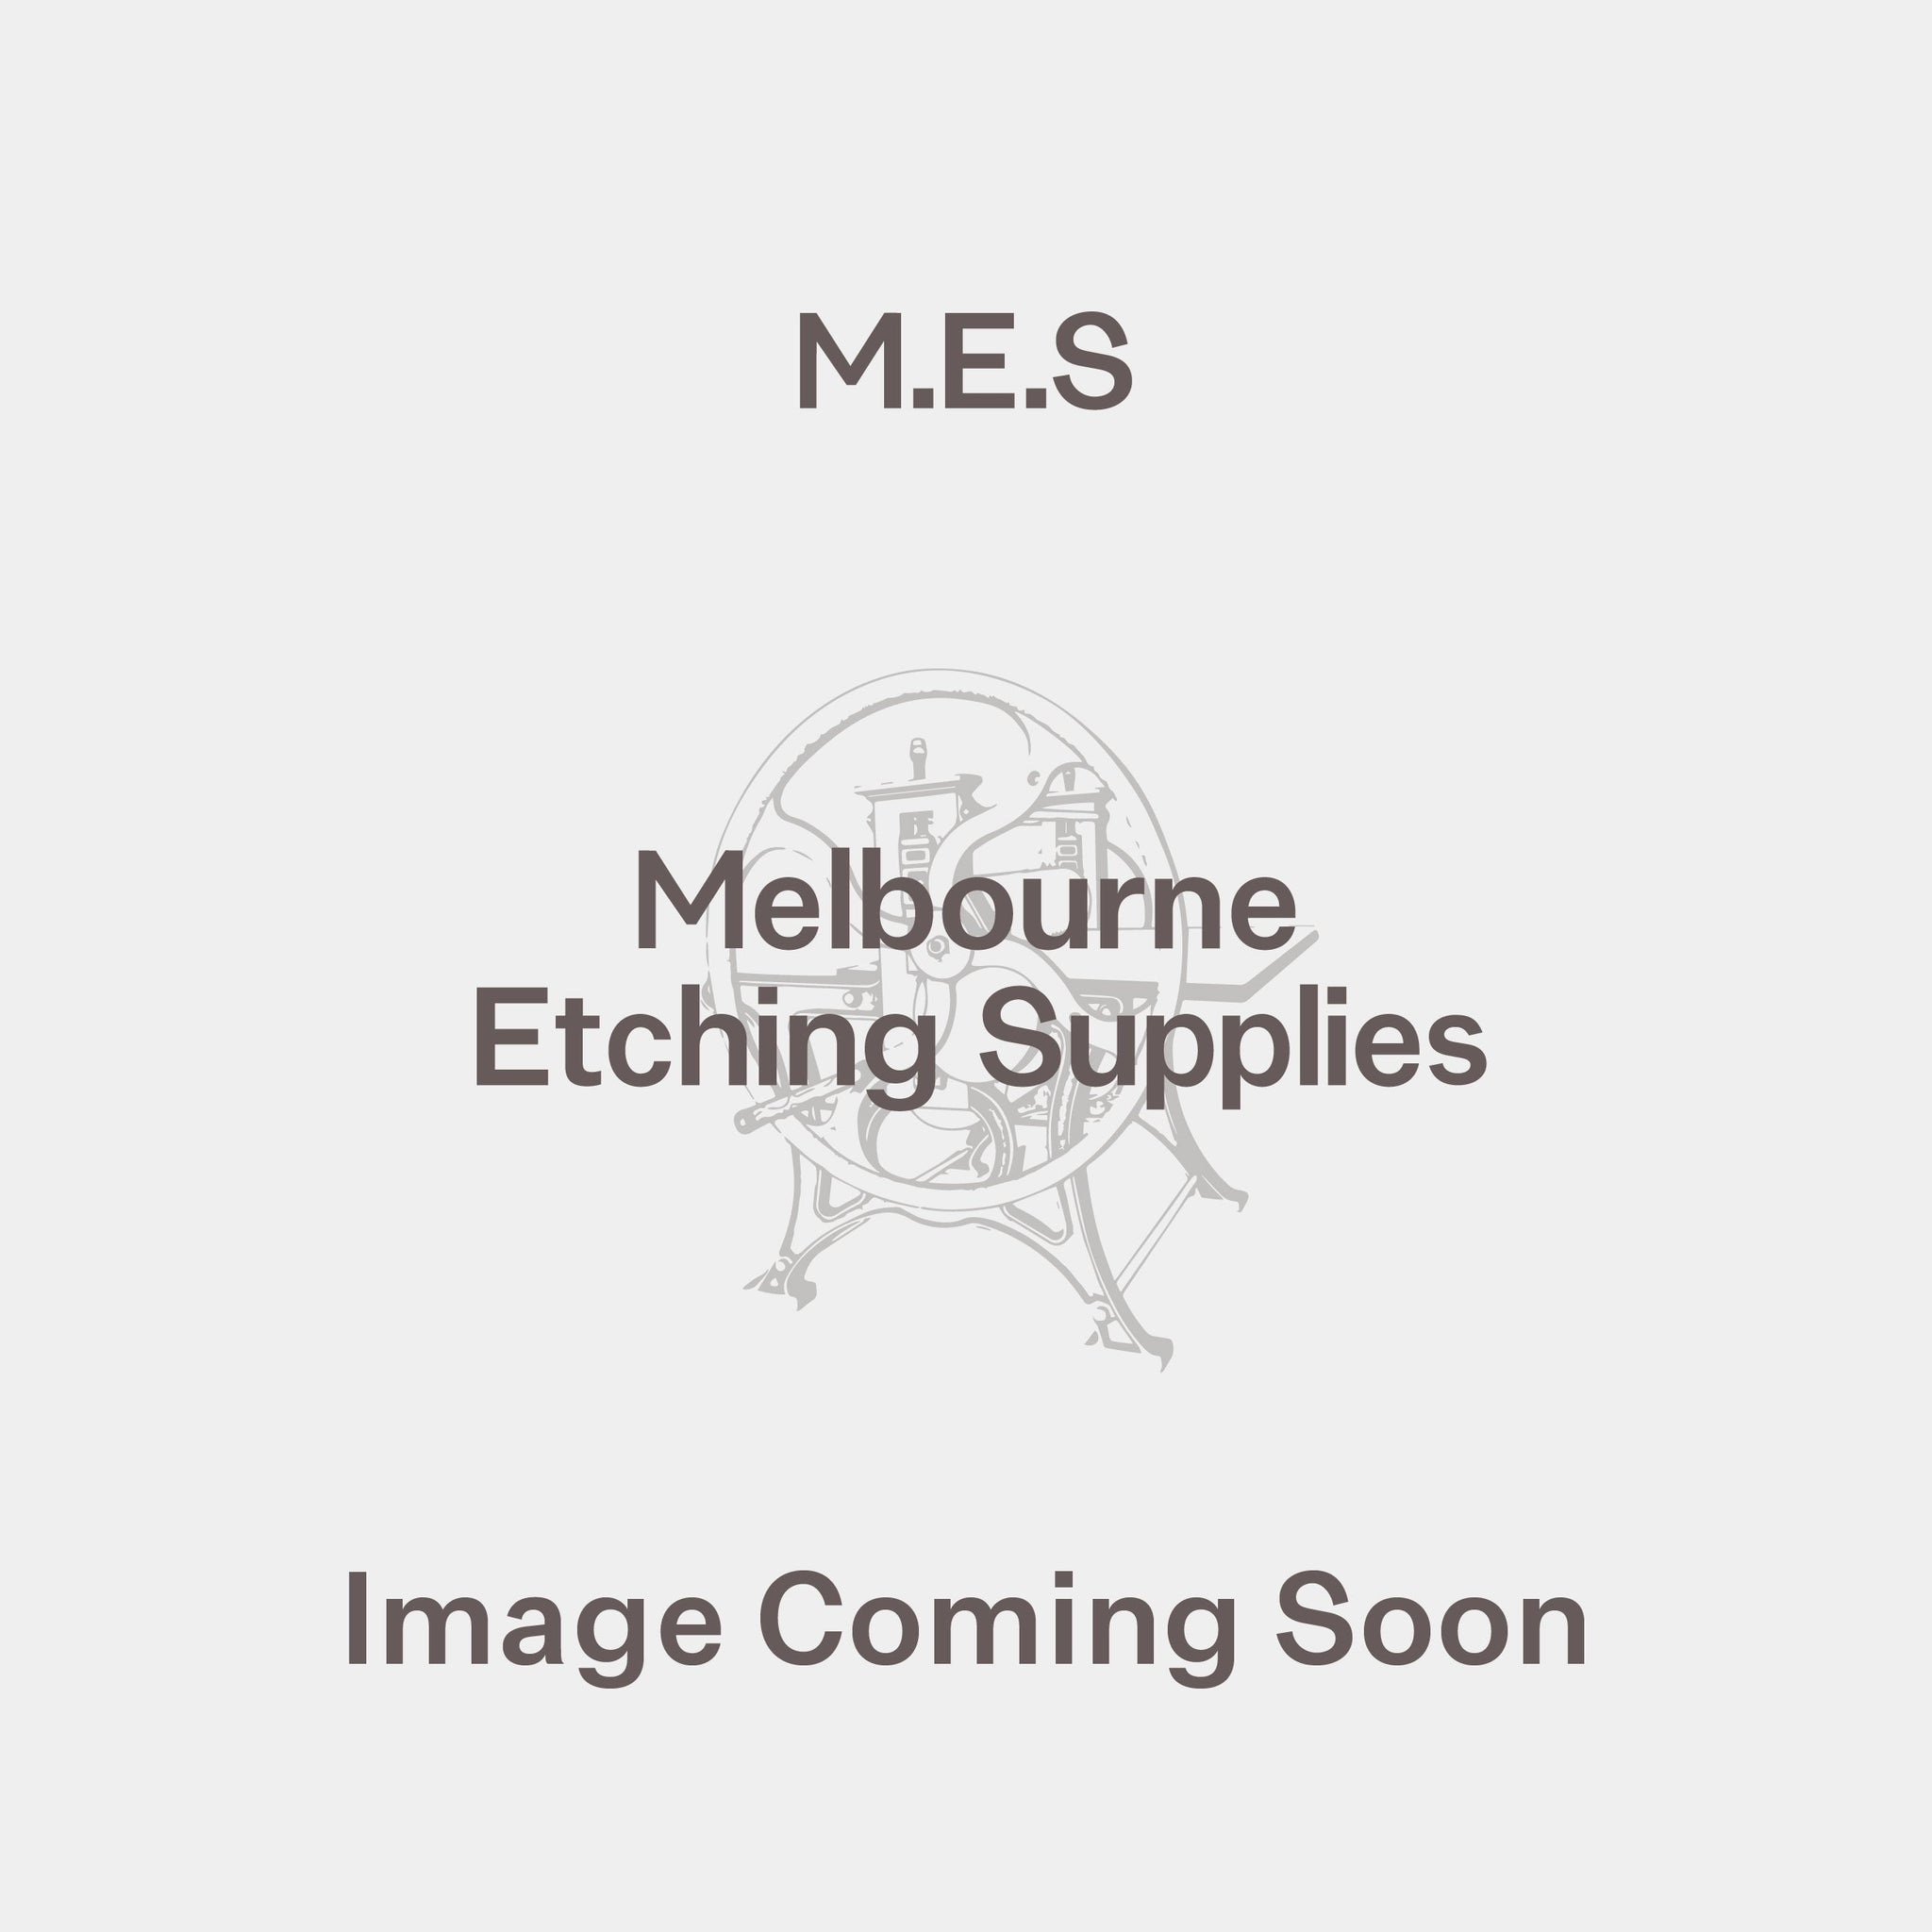 MG Litho 60gsm - Melbourne Etching Supplies